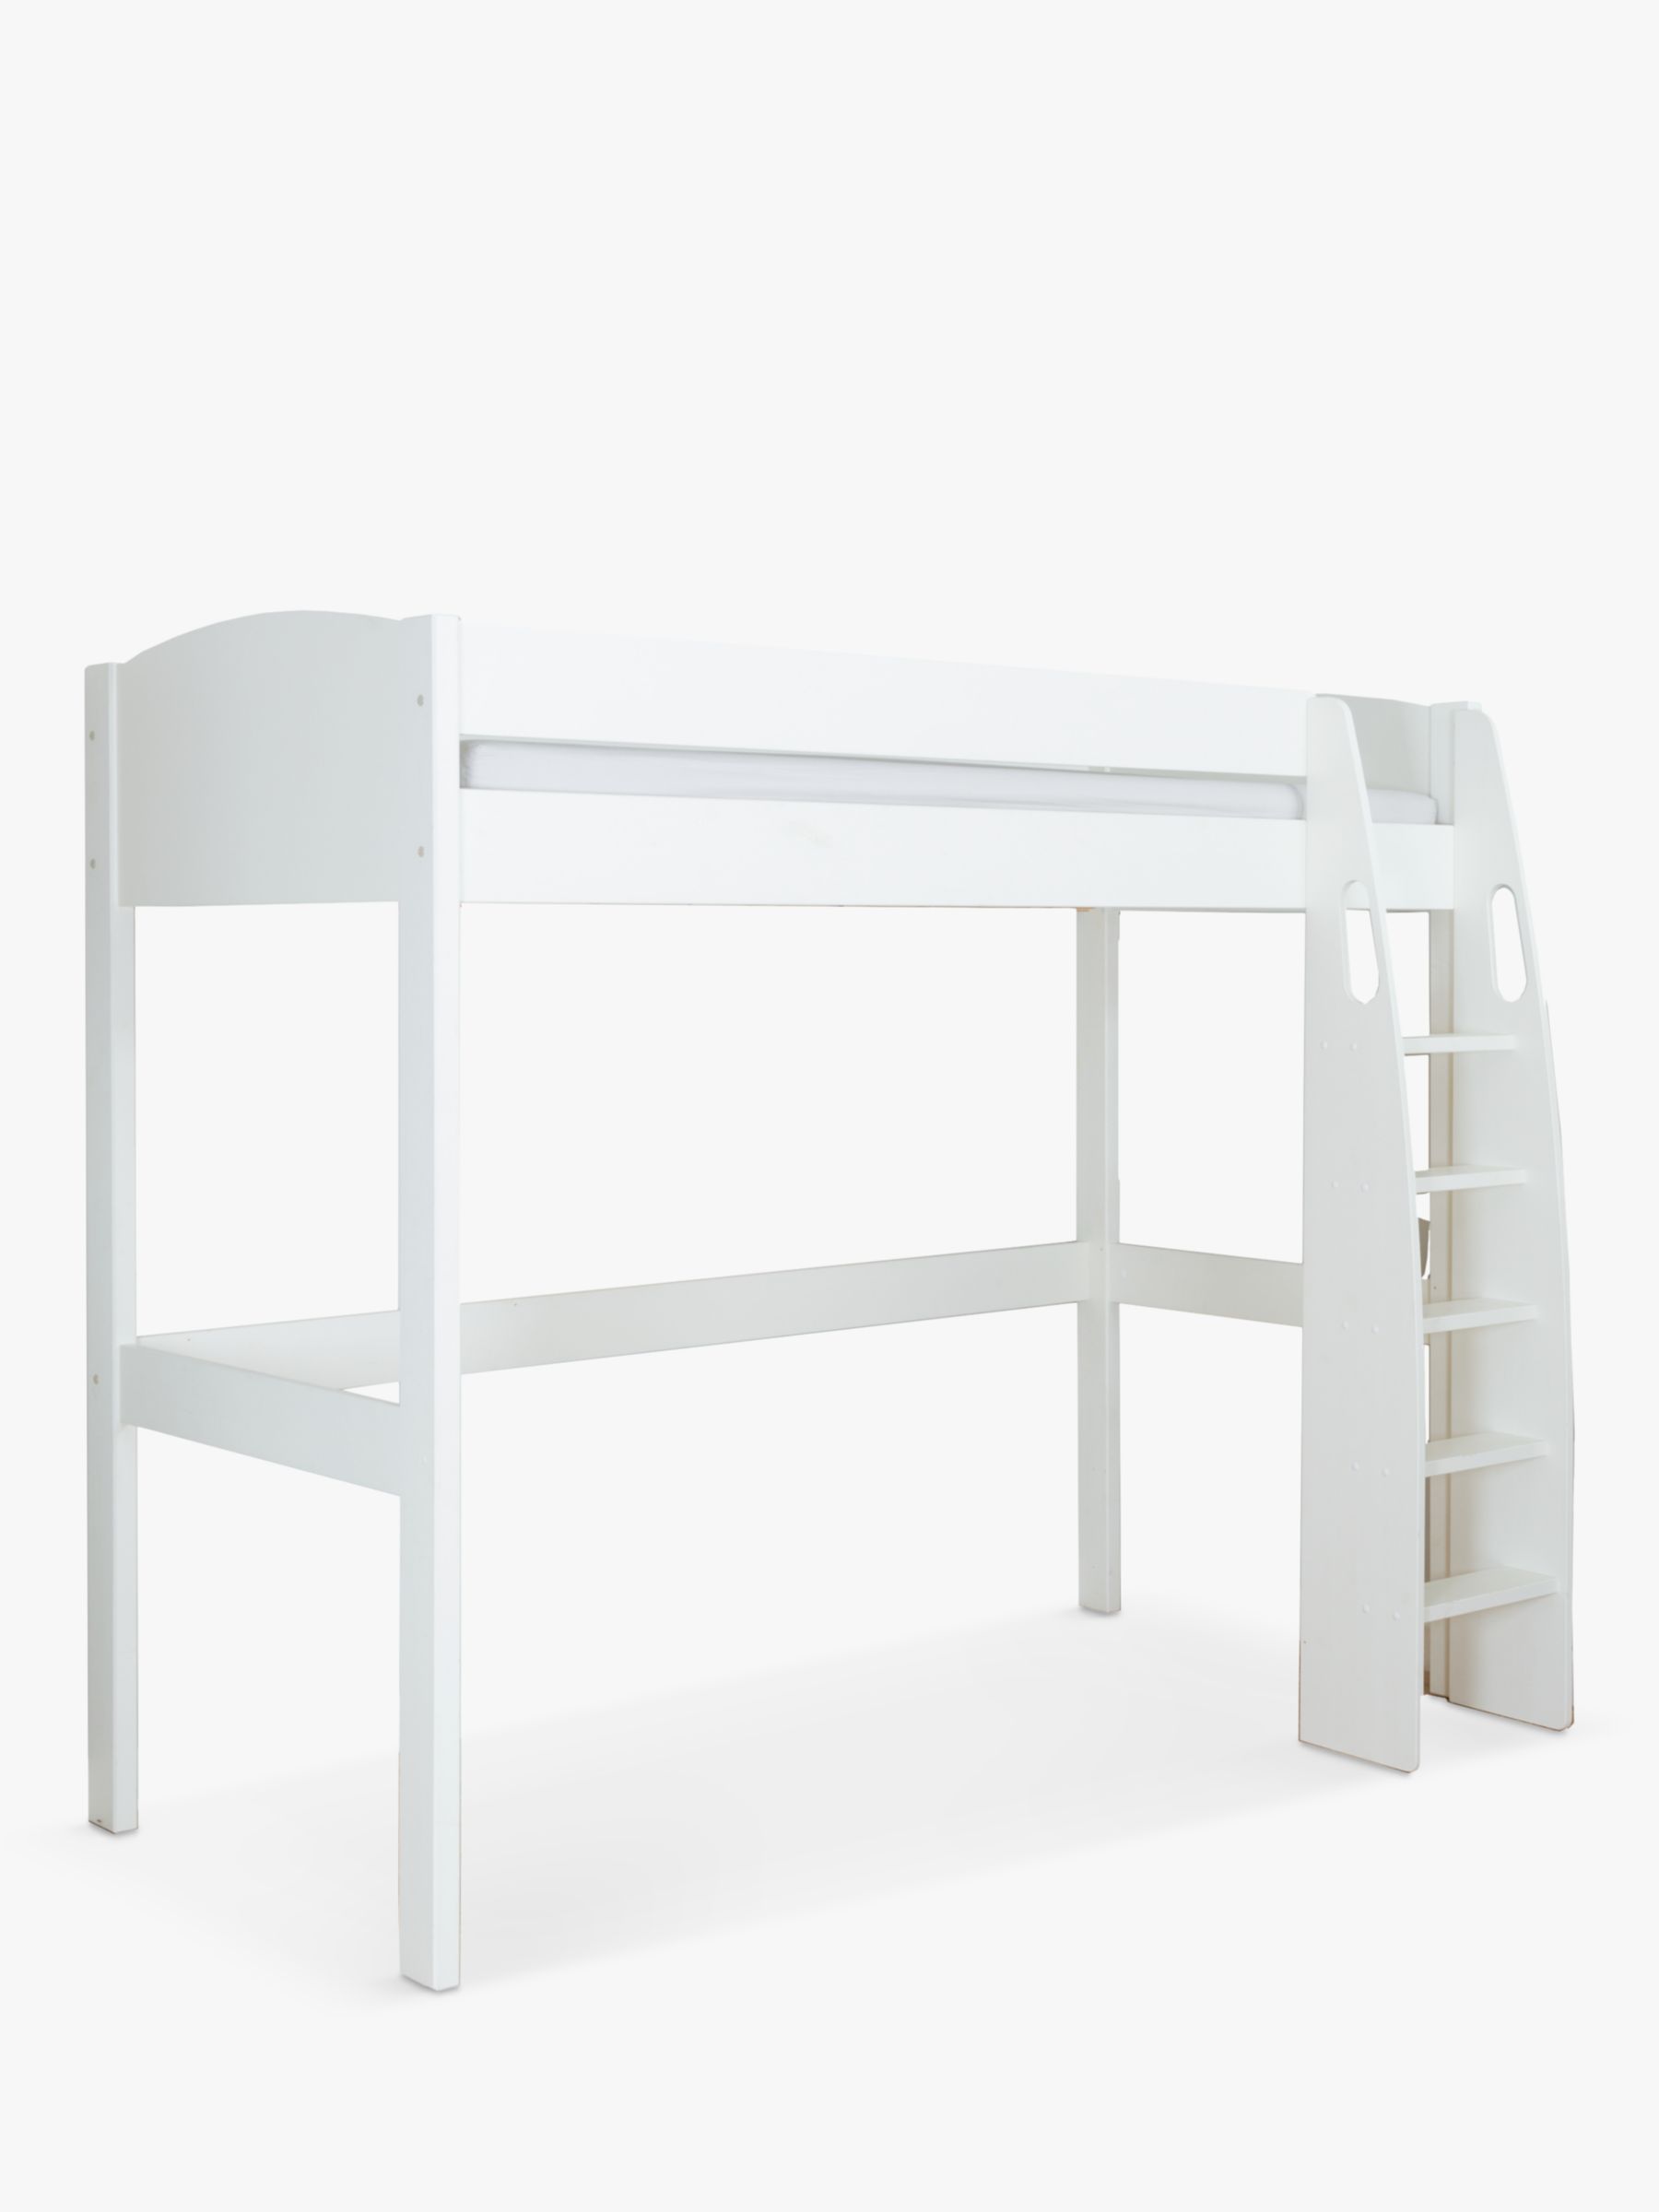 Photo of Stompa uno s plus high-sleeper bed frame